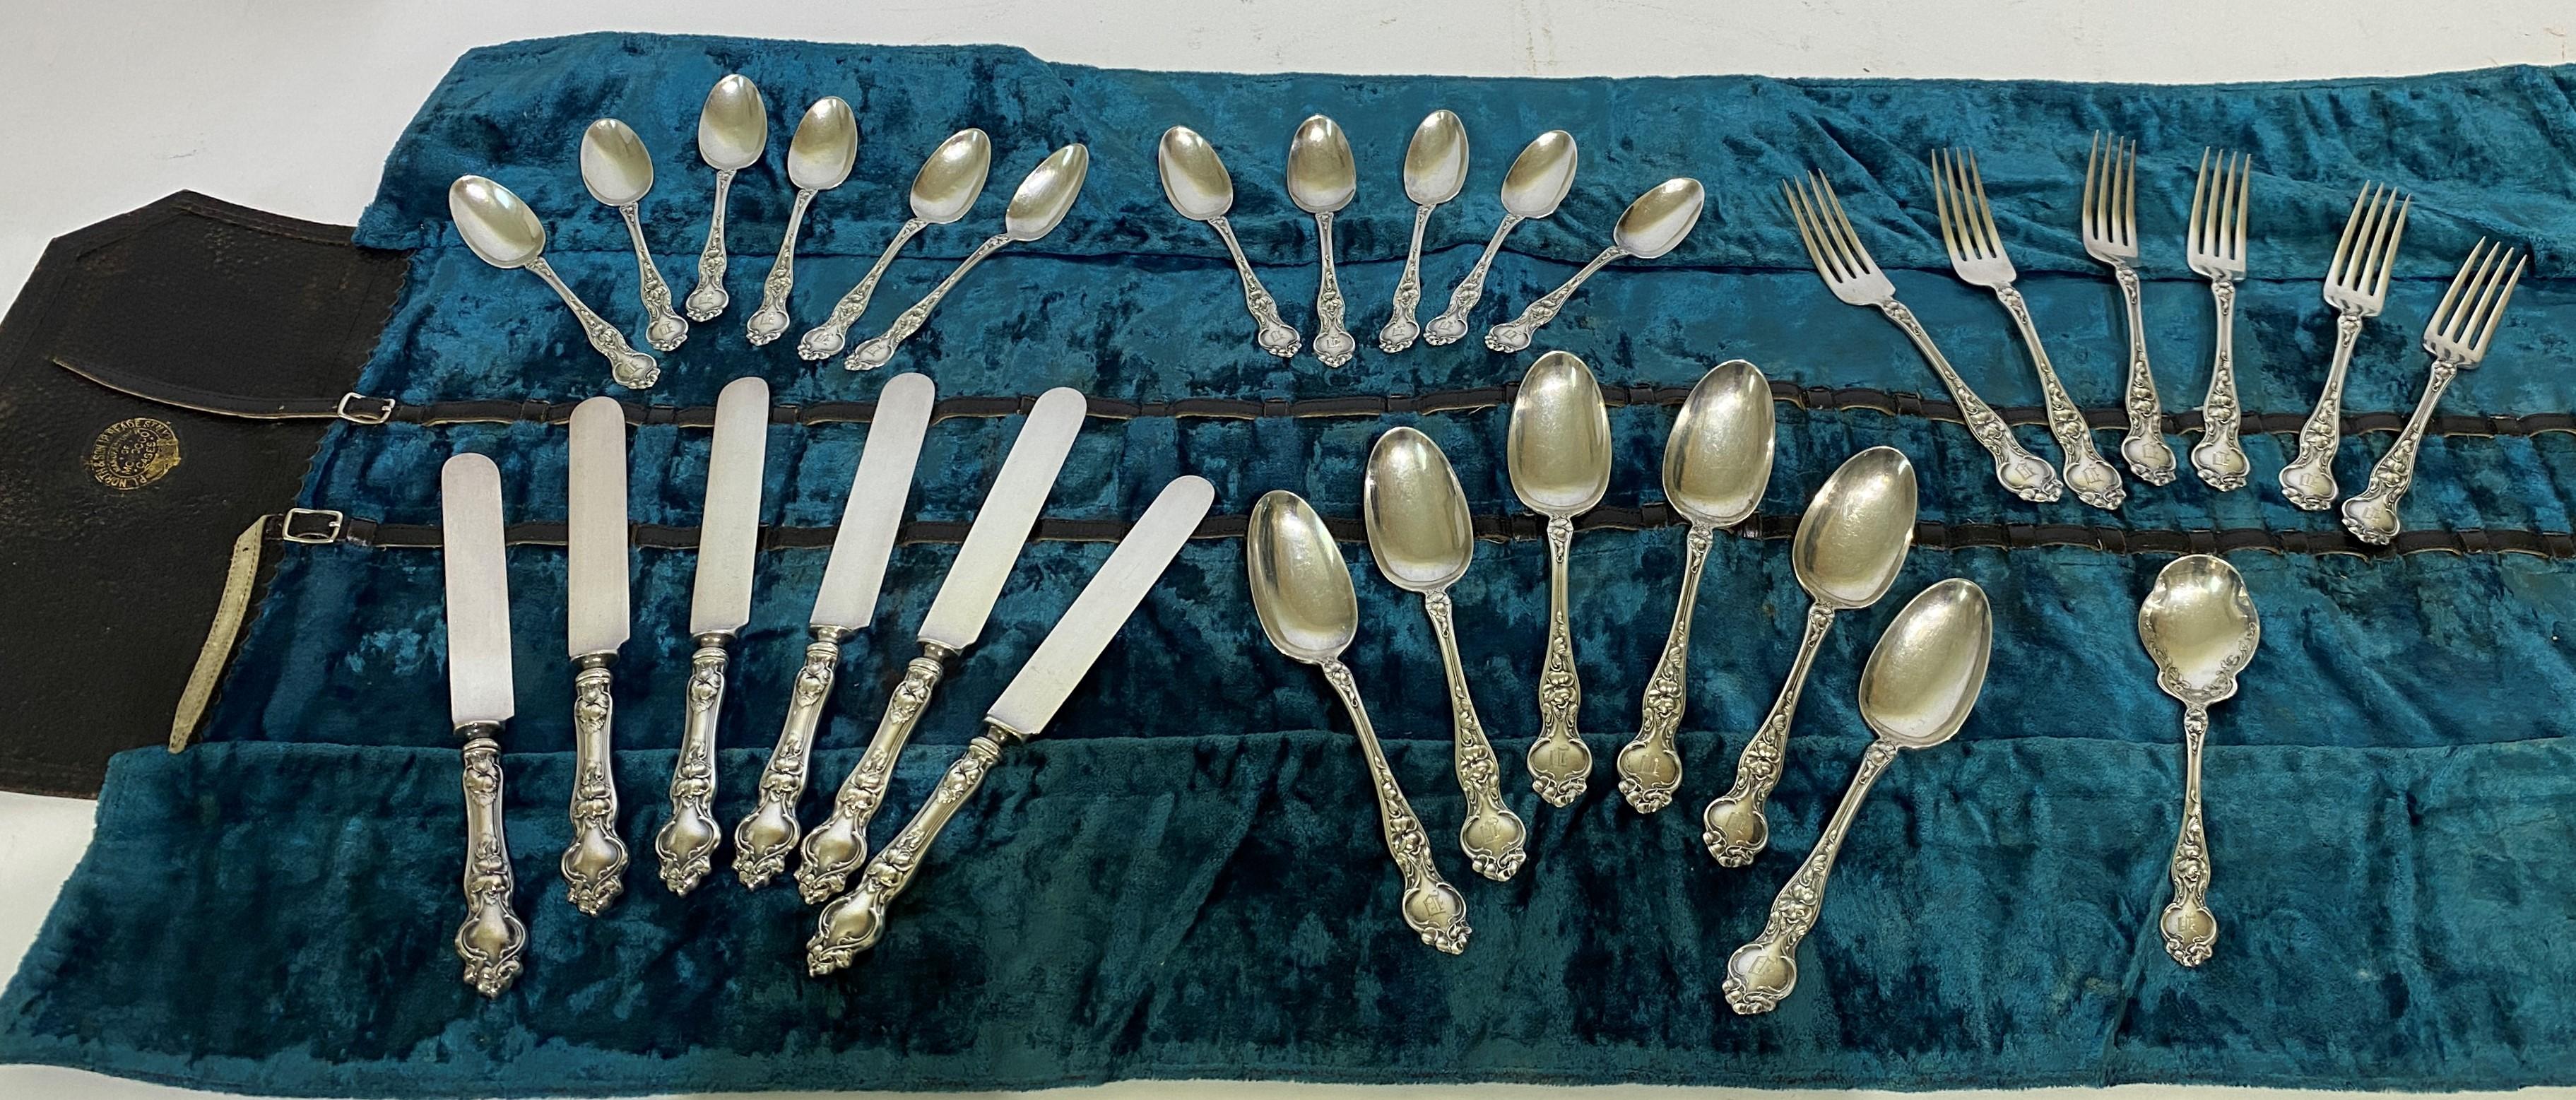 This stylish set of Wallace sterling silver flatware is in the circa 1904 